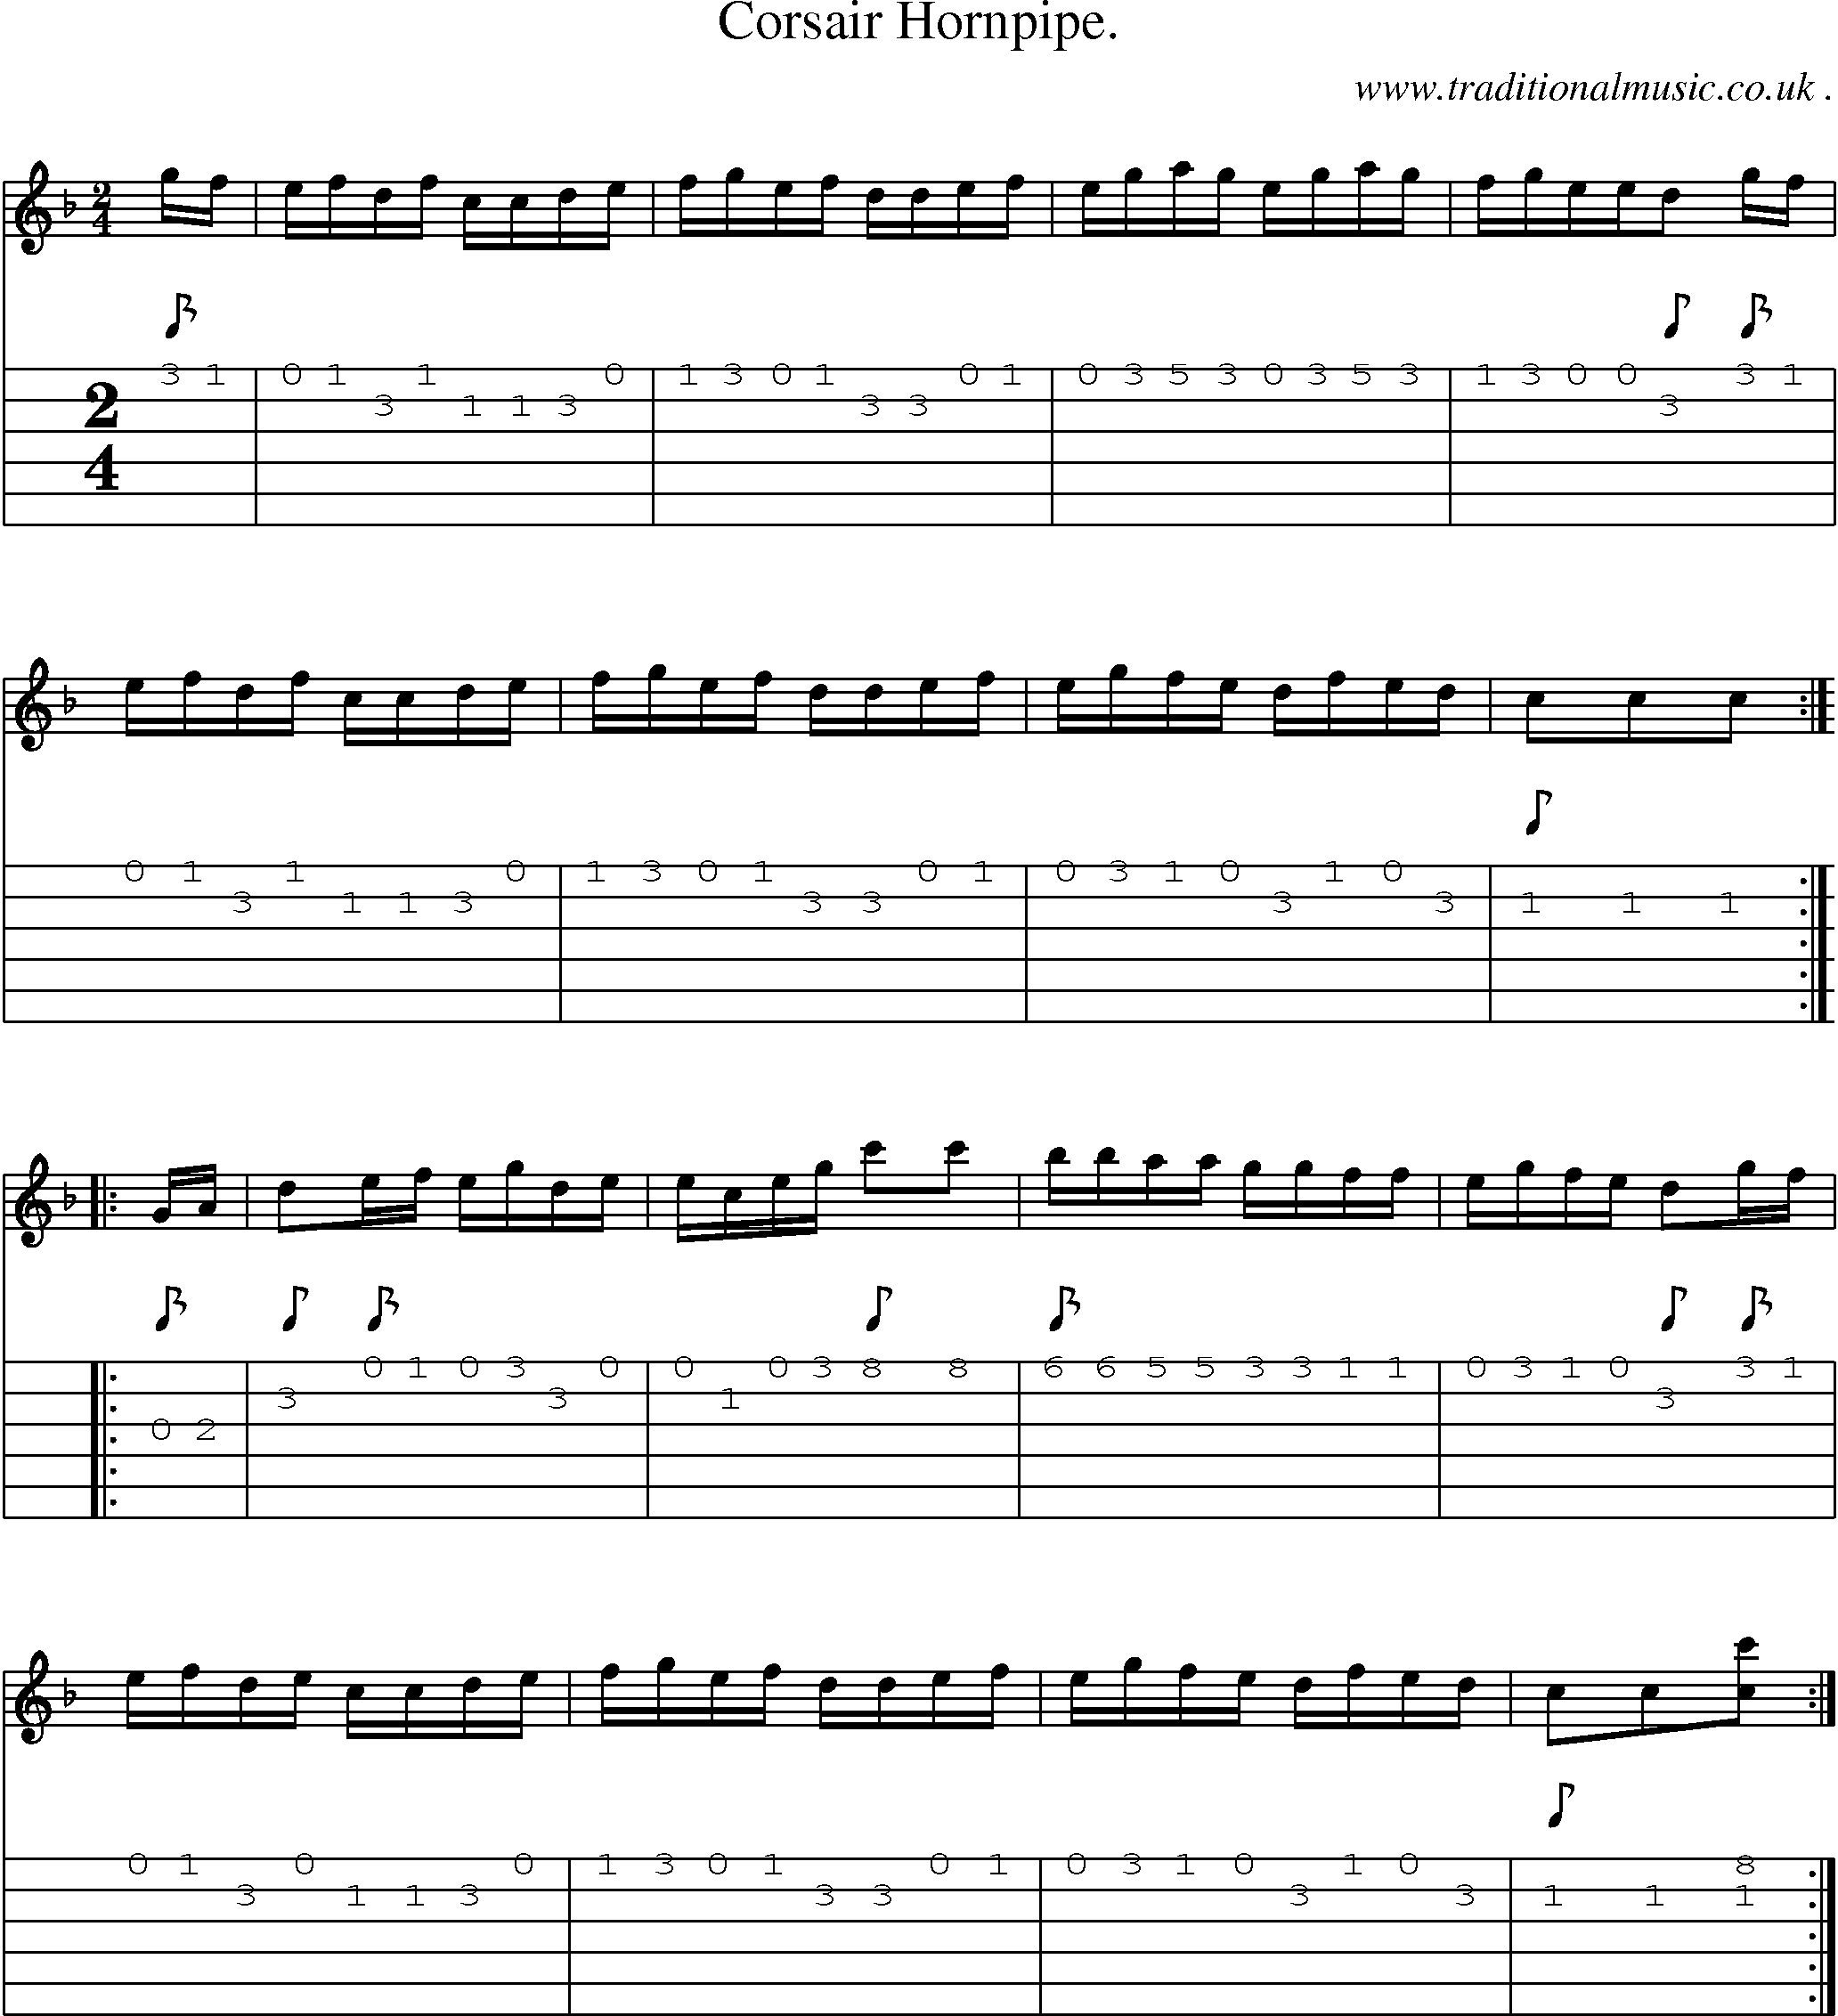 Sheet-Music and Guitar Tabs for Corsair Hornpipe